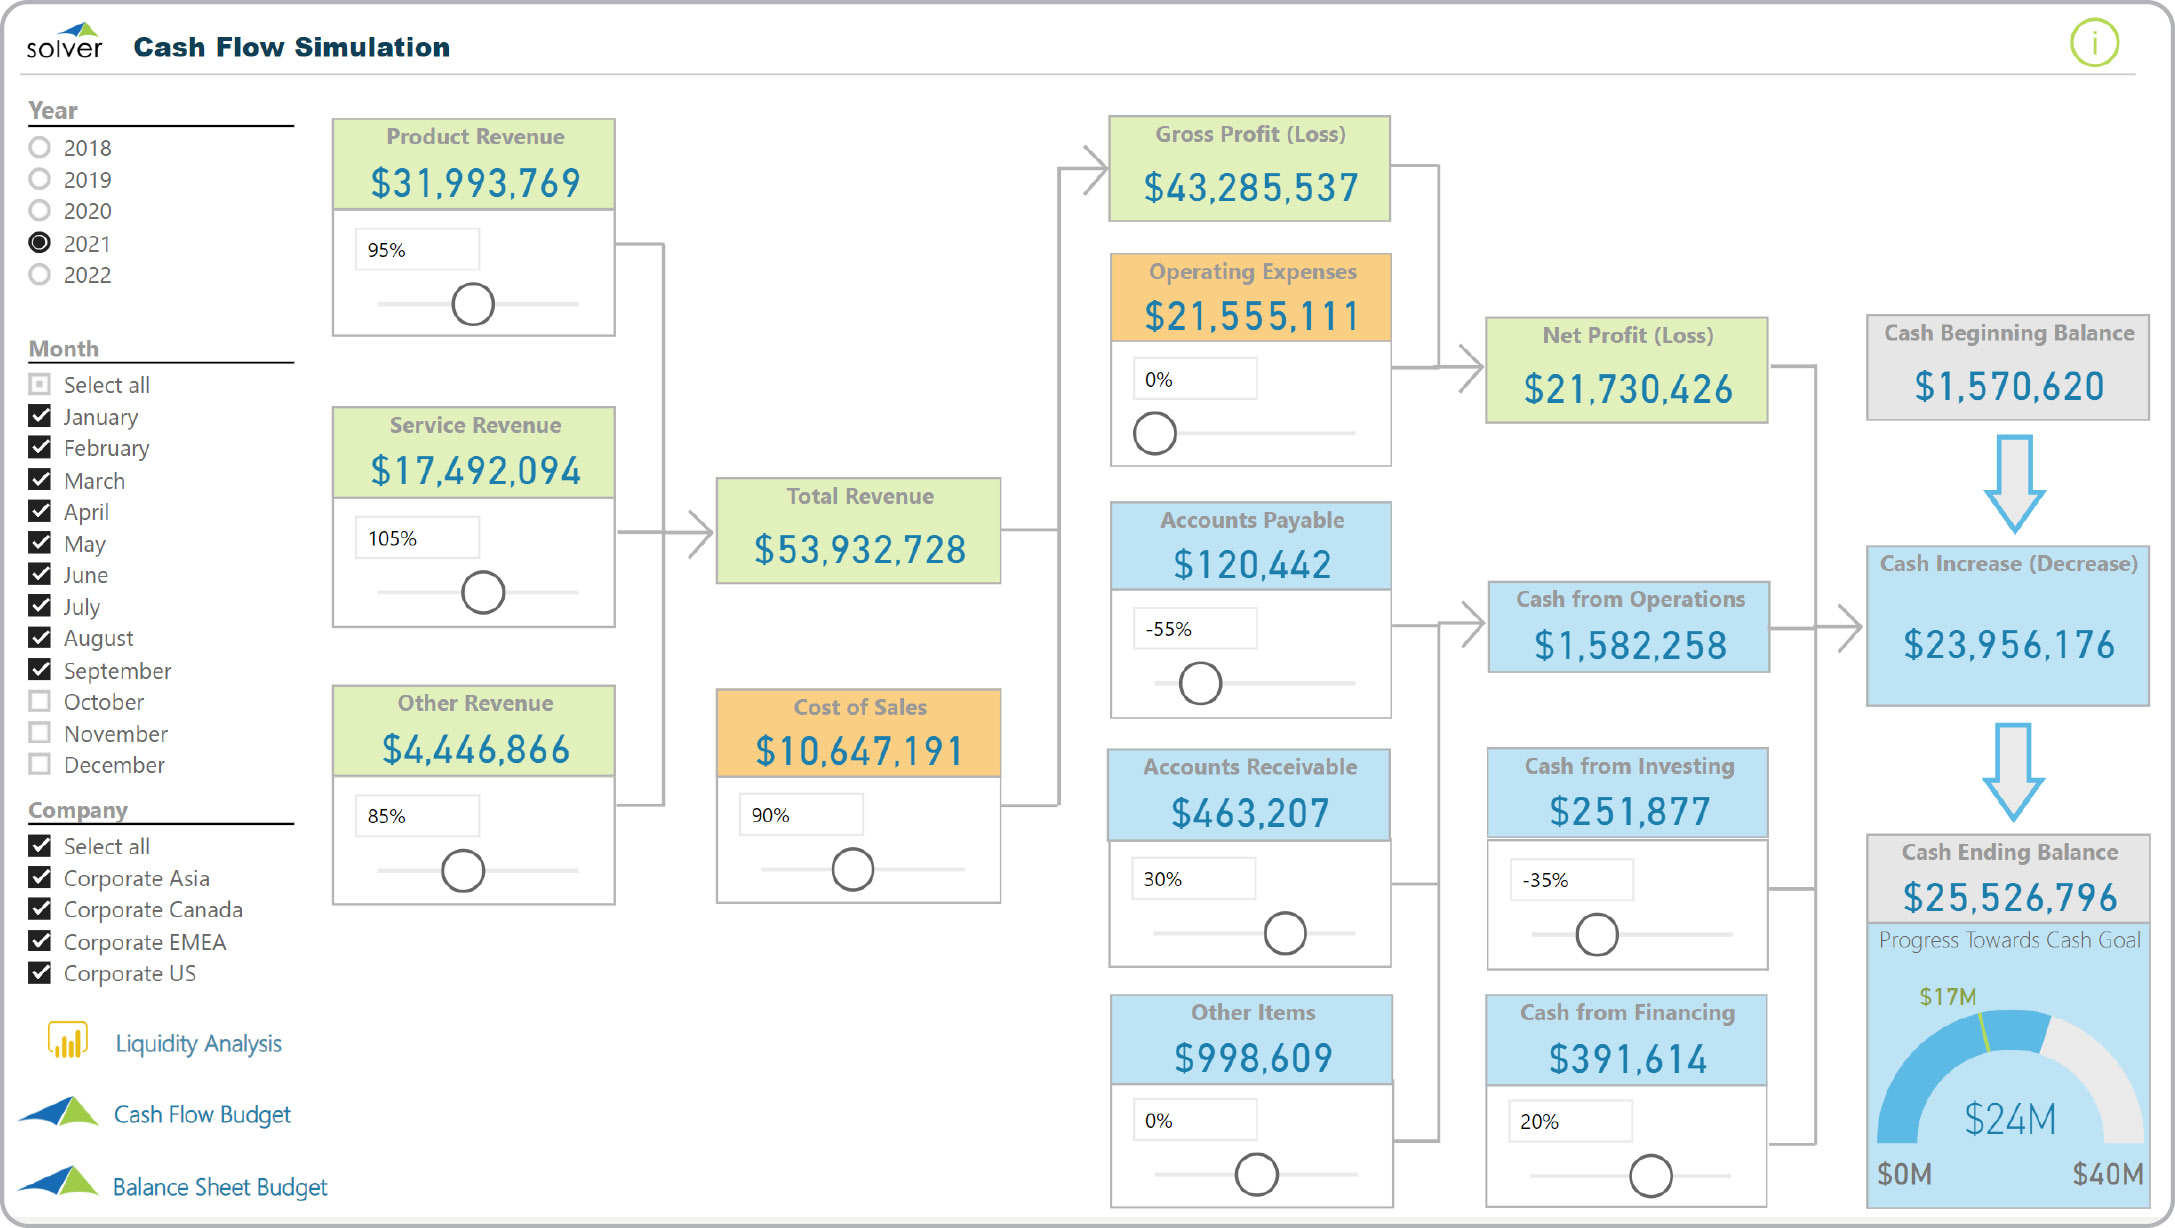 Cash Flow Simulation Dashboard Example 